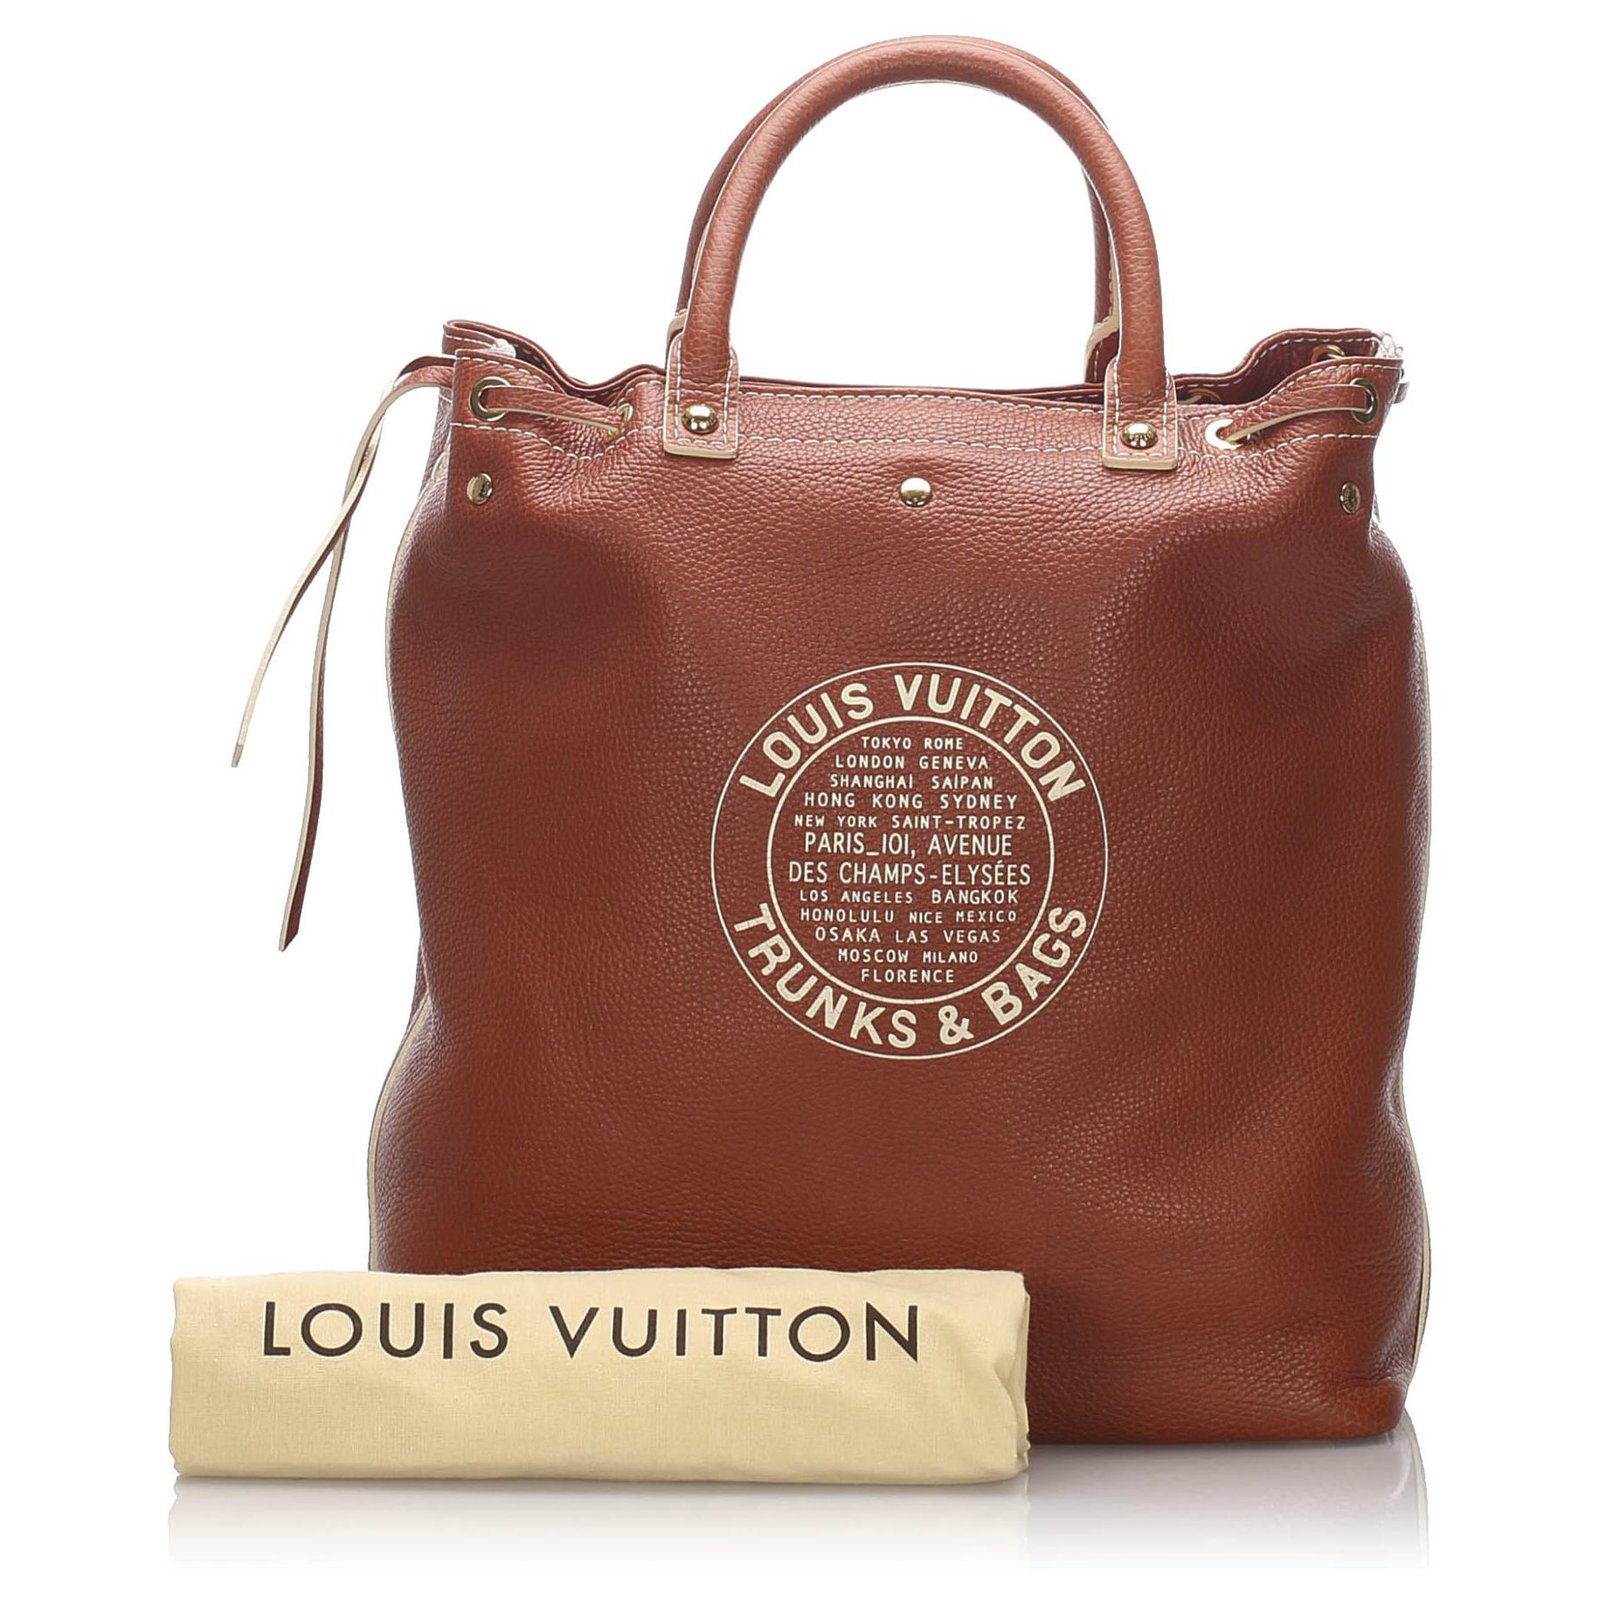 Louis Vuitton Brown Tobago Trunks and Bags Shoe Bag Leather Pony